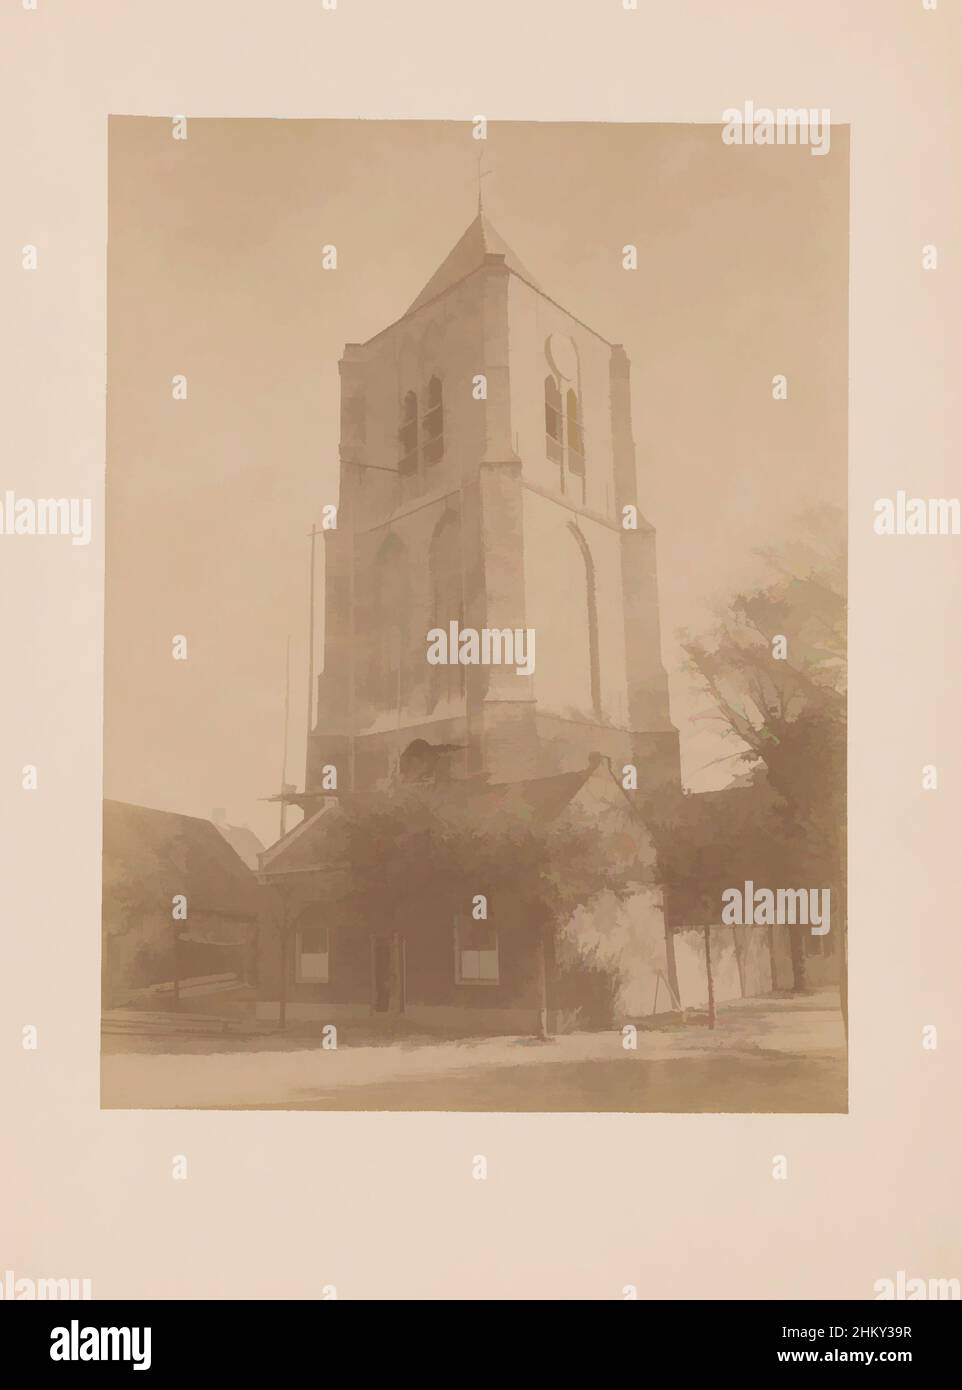 Art inspired by Church tower at Ouwerkerk, anoniem (Monumentenzorg) (attributed to), Ouwerkerk, 1897, photographic support, cardboard, albumen print, height 231 mm × width 173 mm, Classic works modernized by Artotop with a splash of modernity. Shapes, color and value, eye-catching visual impact on art. Emotions through freedom of artworks in a contemporary way. A timeless message pursuing a wildly creative new direction. Artists turning to the digital medium and creating the Artotop NFT Stock Photo